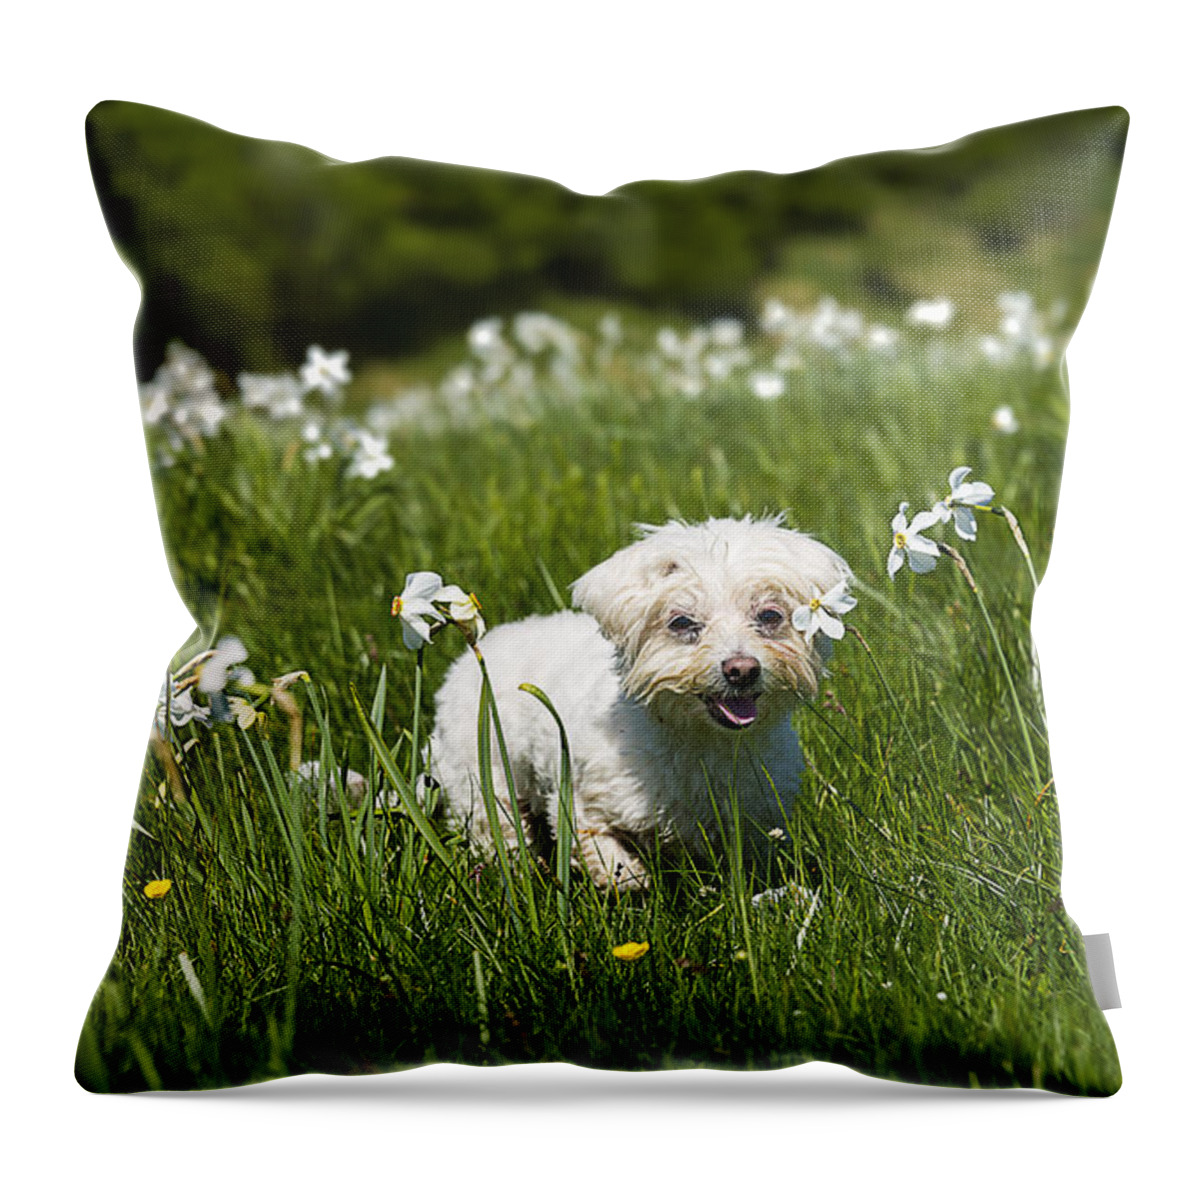 Narcisi Throw Pillow featuring the photograph Daffodils White Blossoming With Little White Lilly 2 by Enrico Pelos